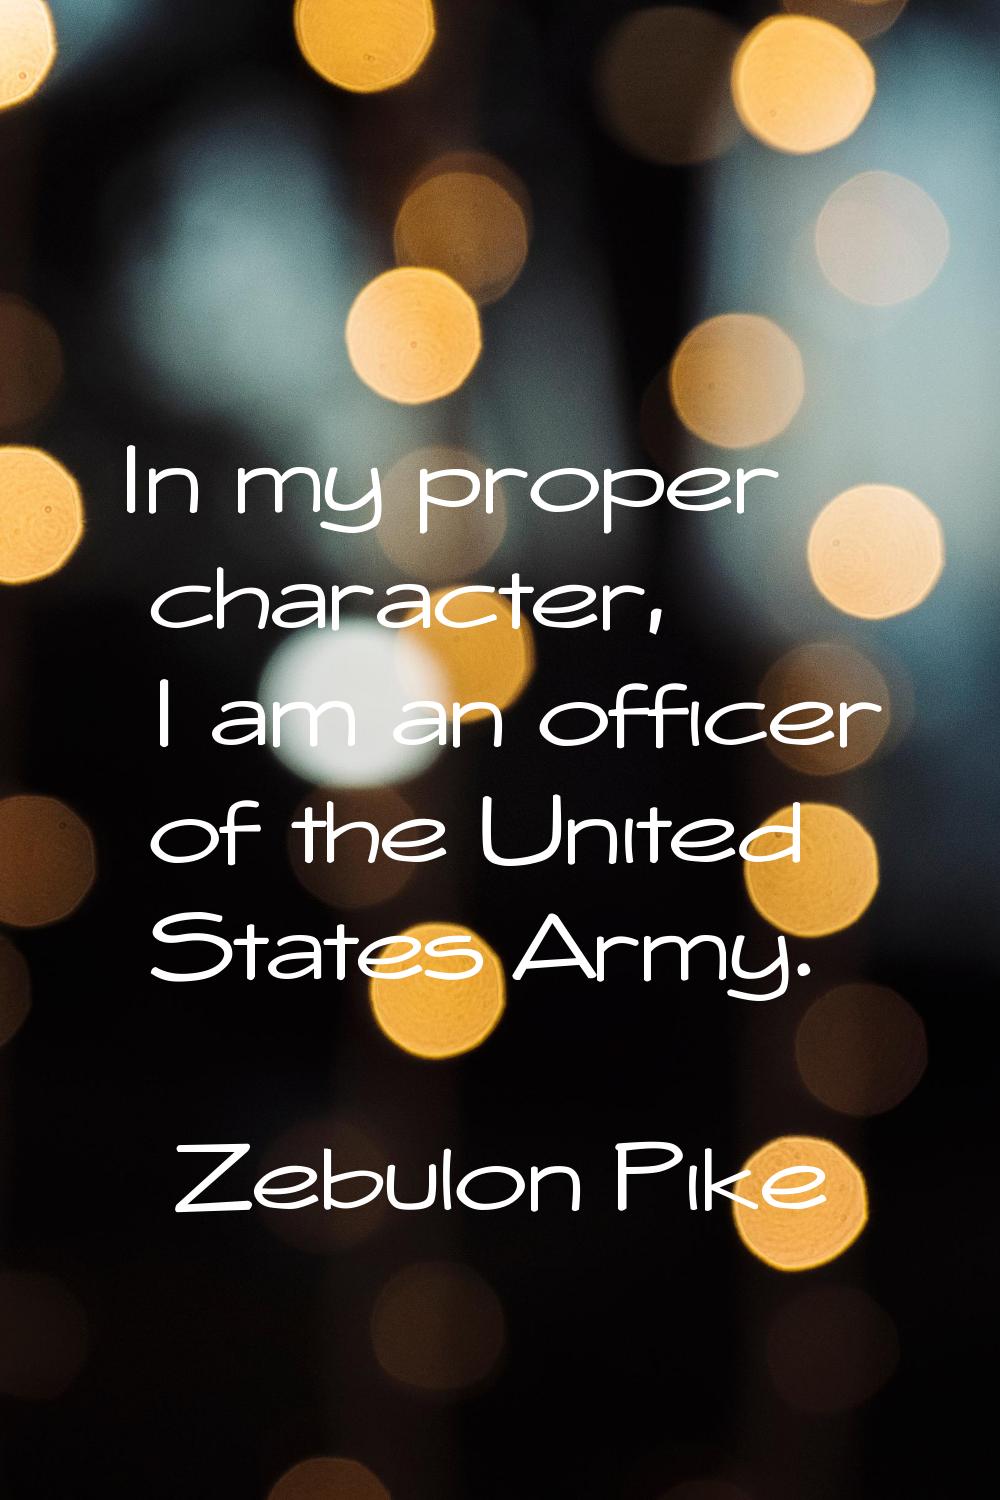 In my proper character, I am an officer of the United States Army.